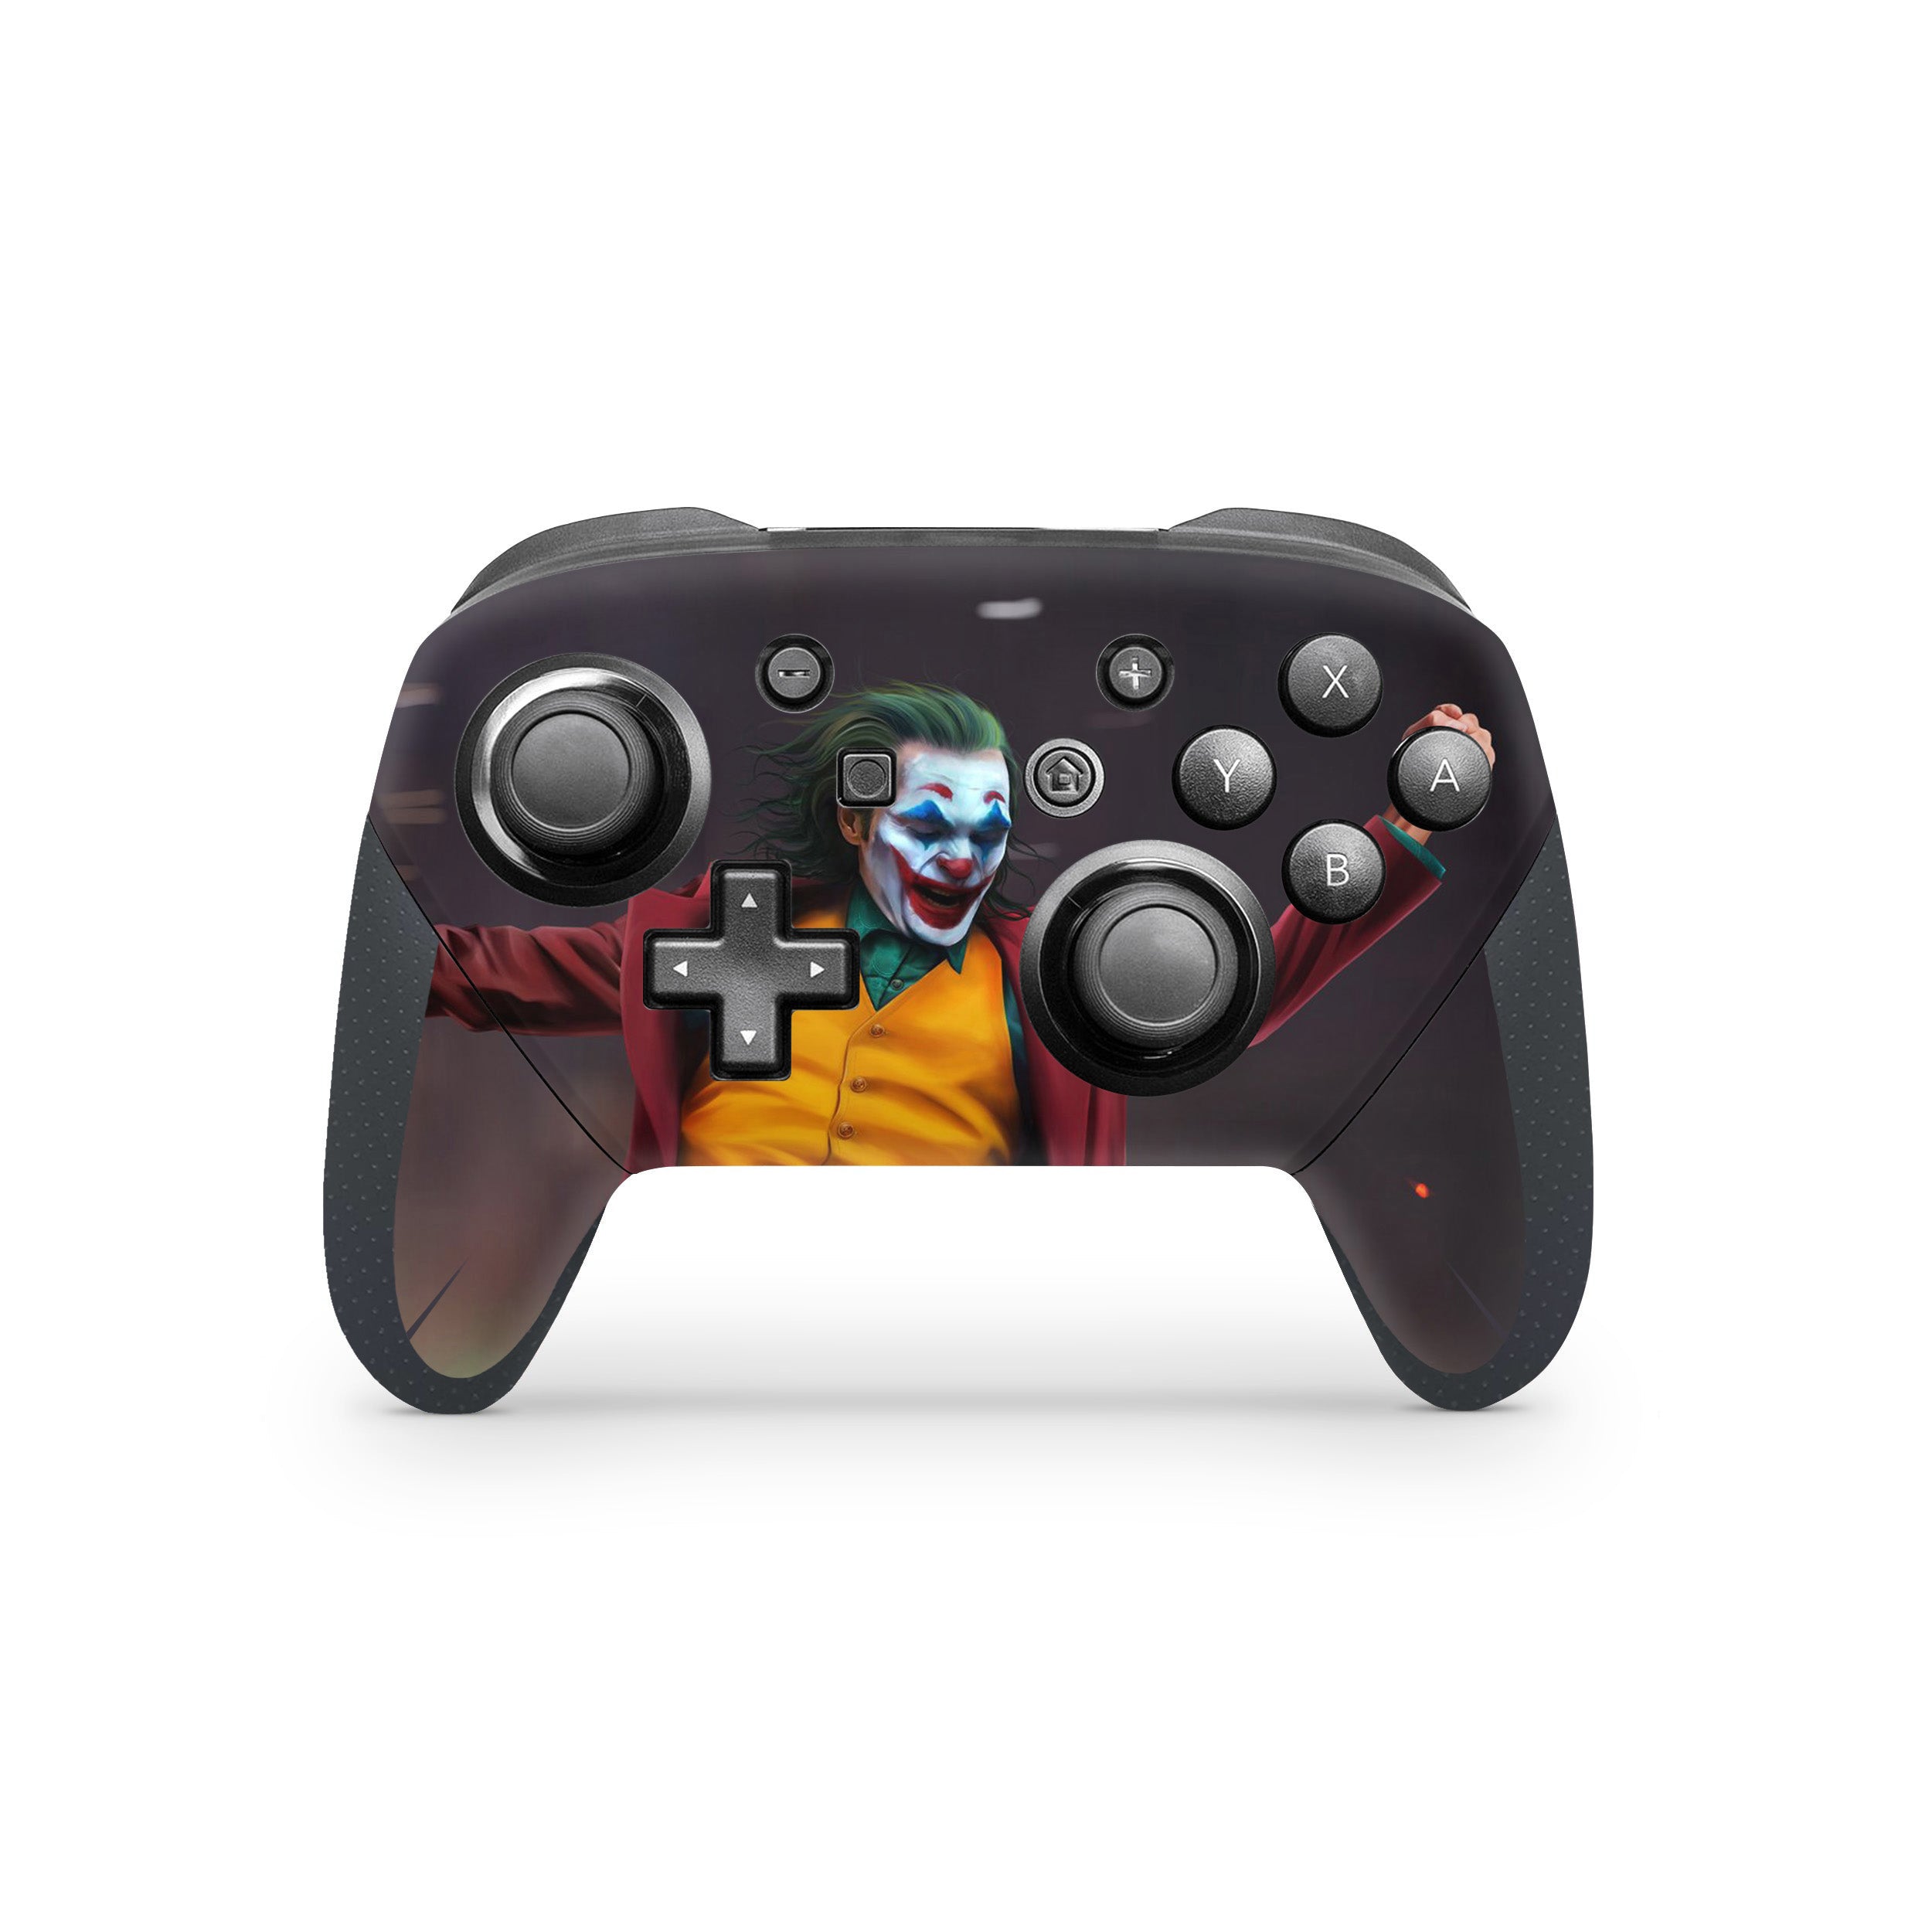 A video game skin featuring a DC Comics Joker design for the Switch Pro Controller.